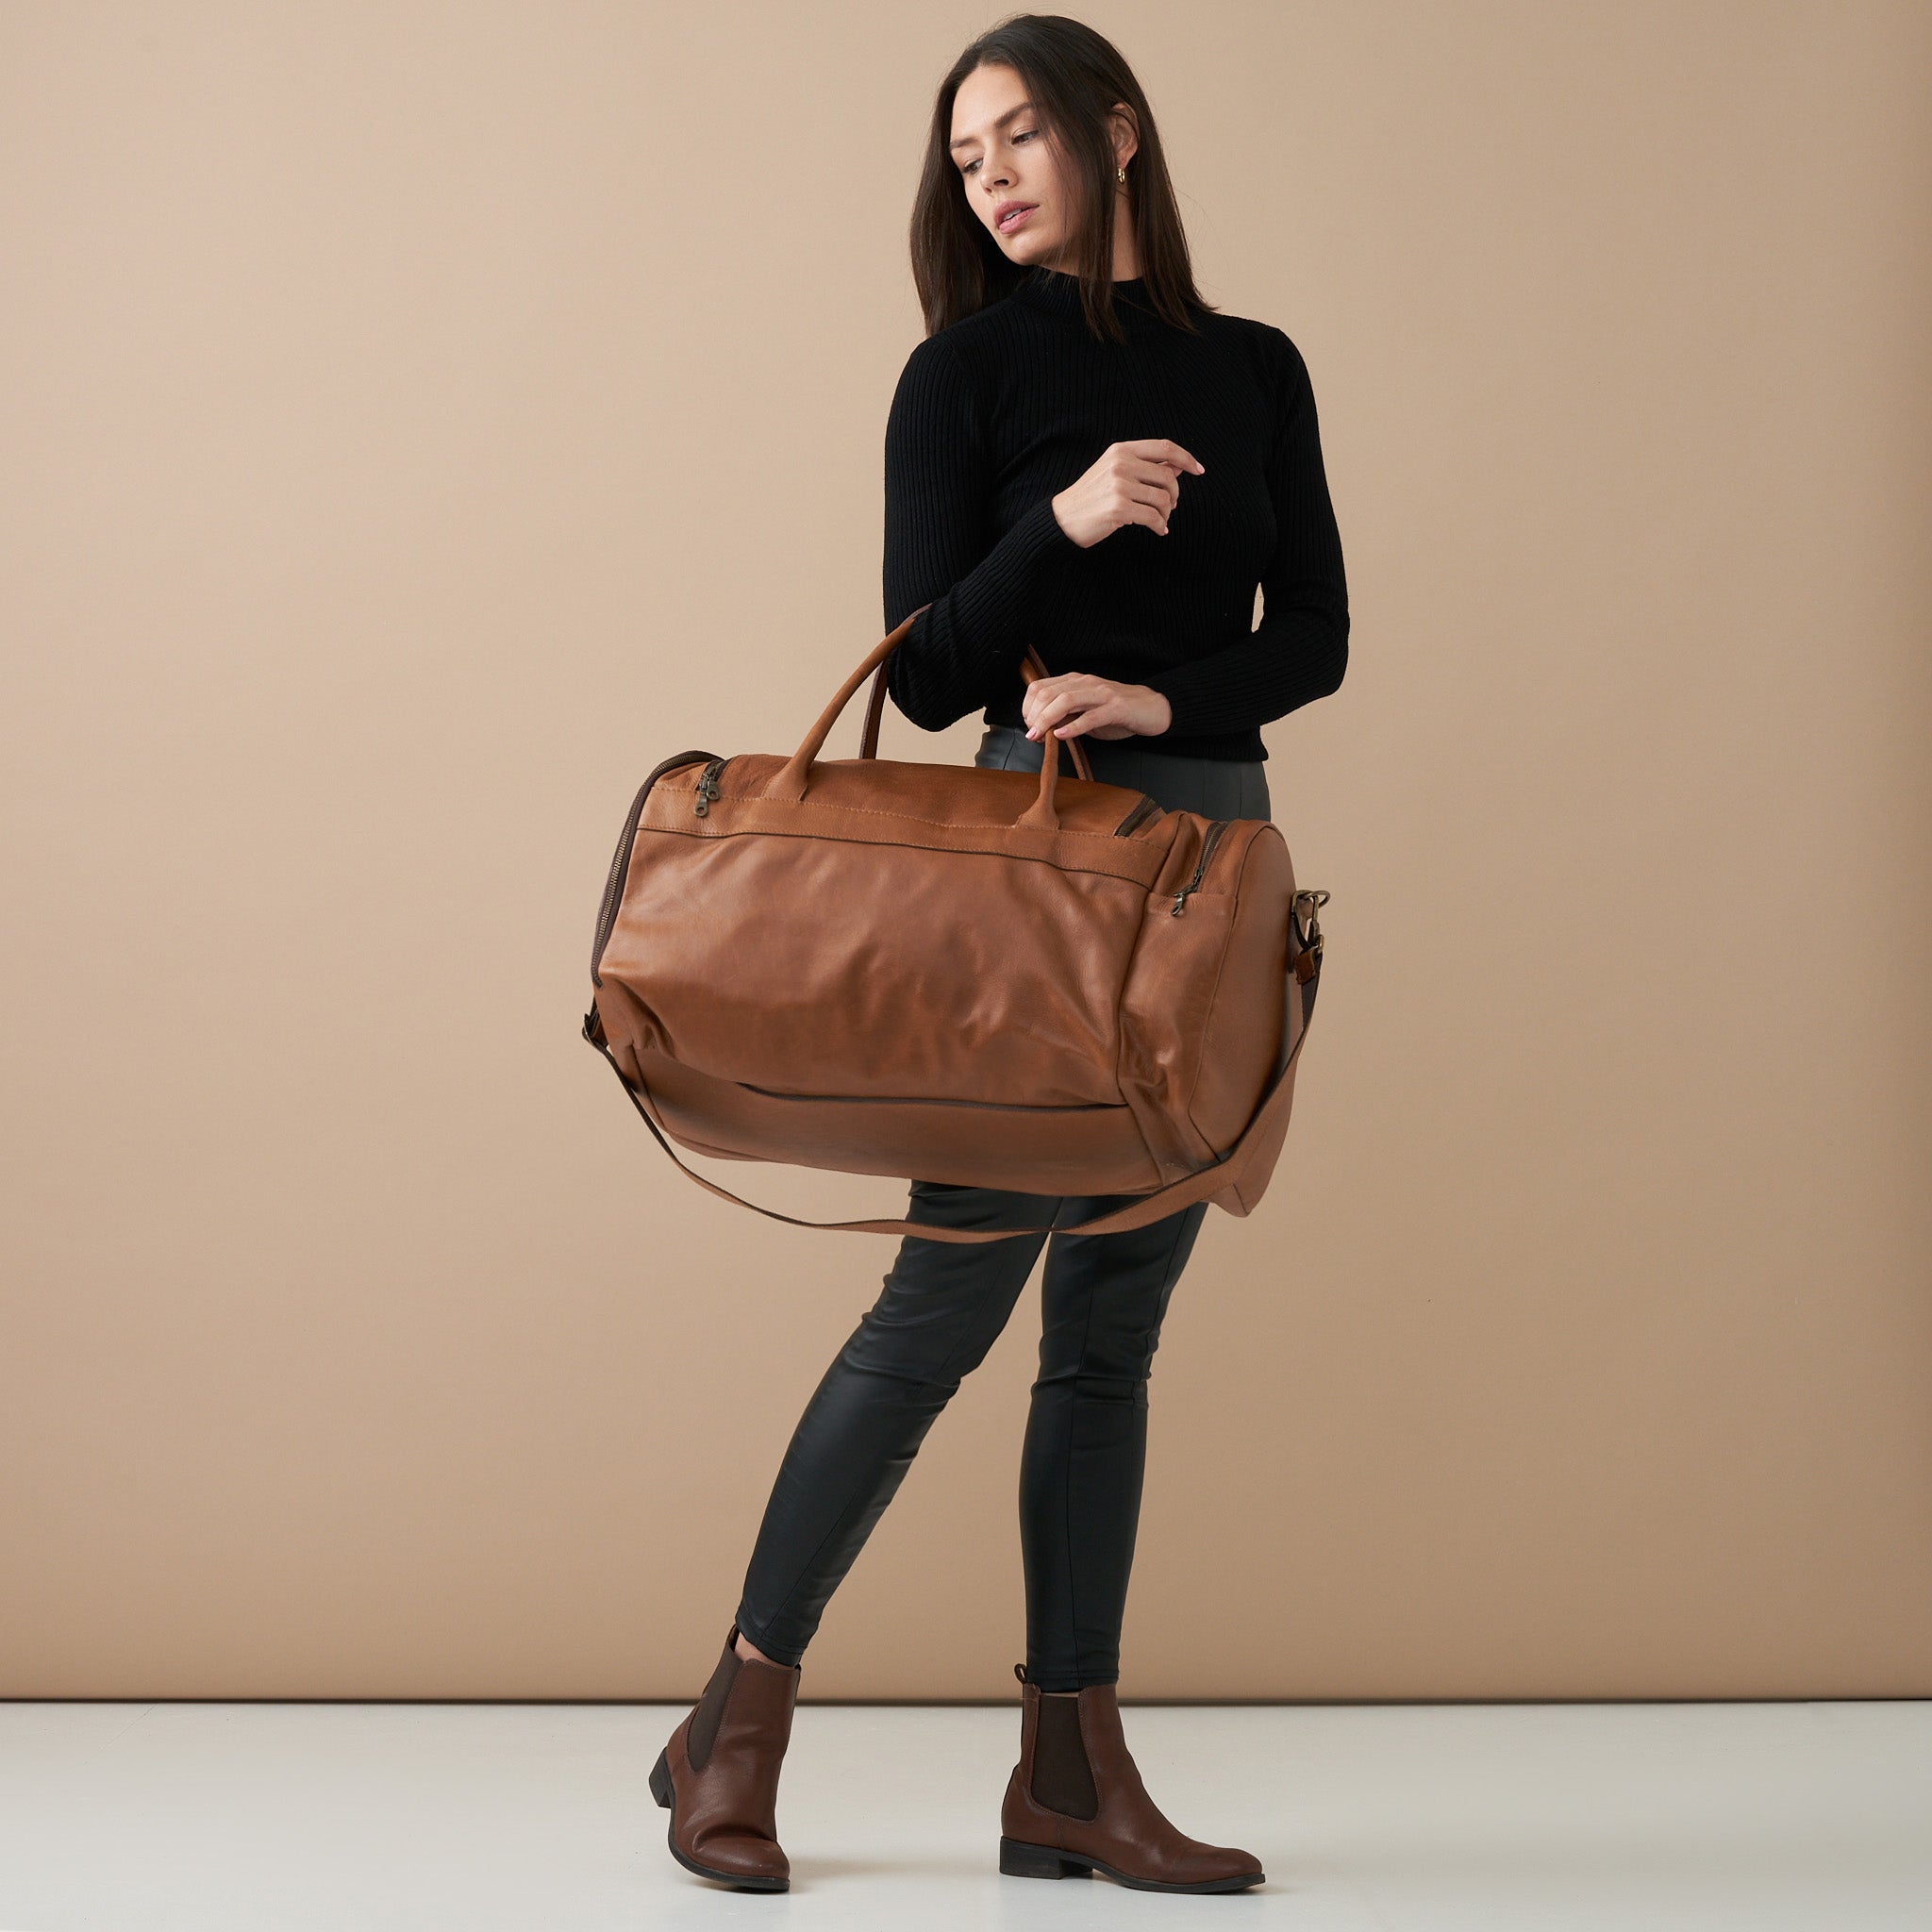 Model holding Pecan Genuine Leather Sports Duffel Bag with Waterproof Lining &amp; Sneaker Compartment